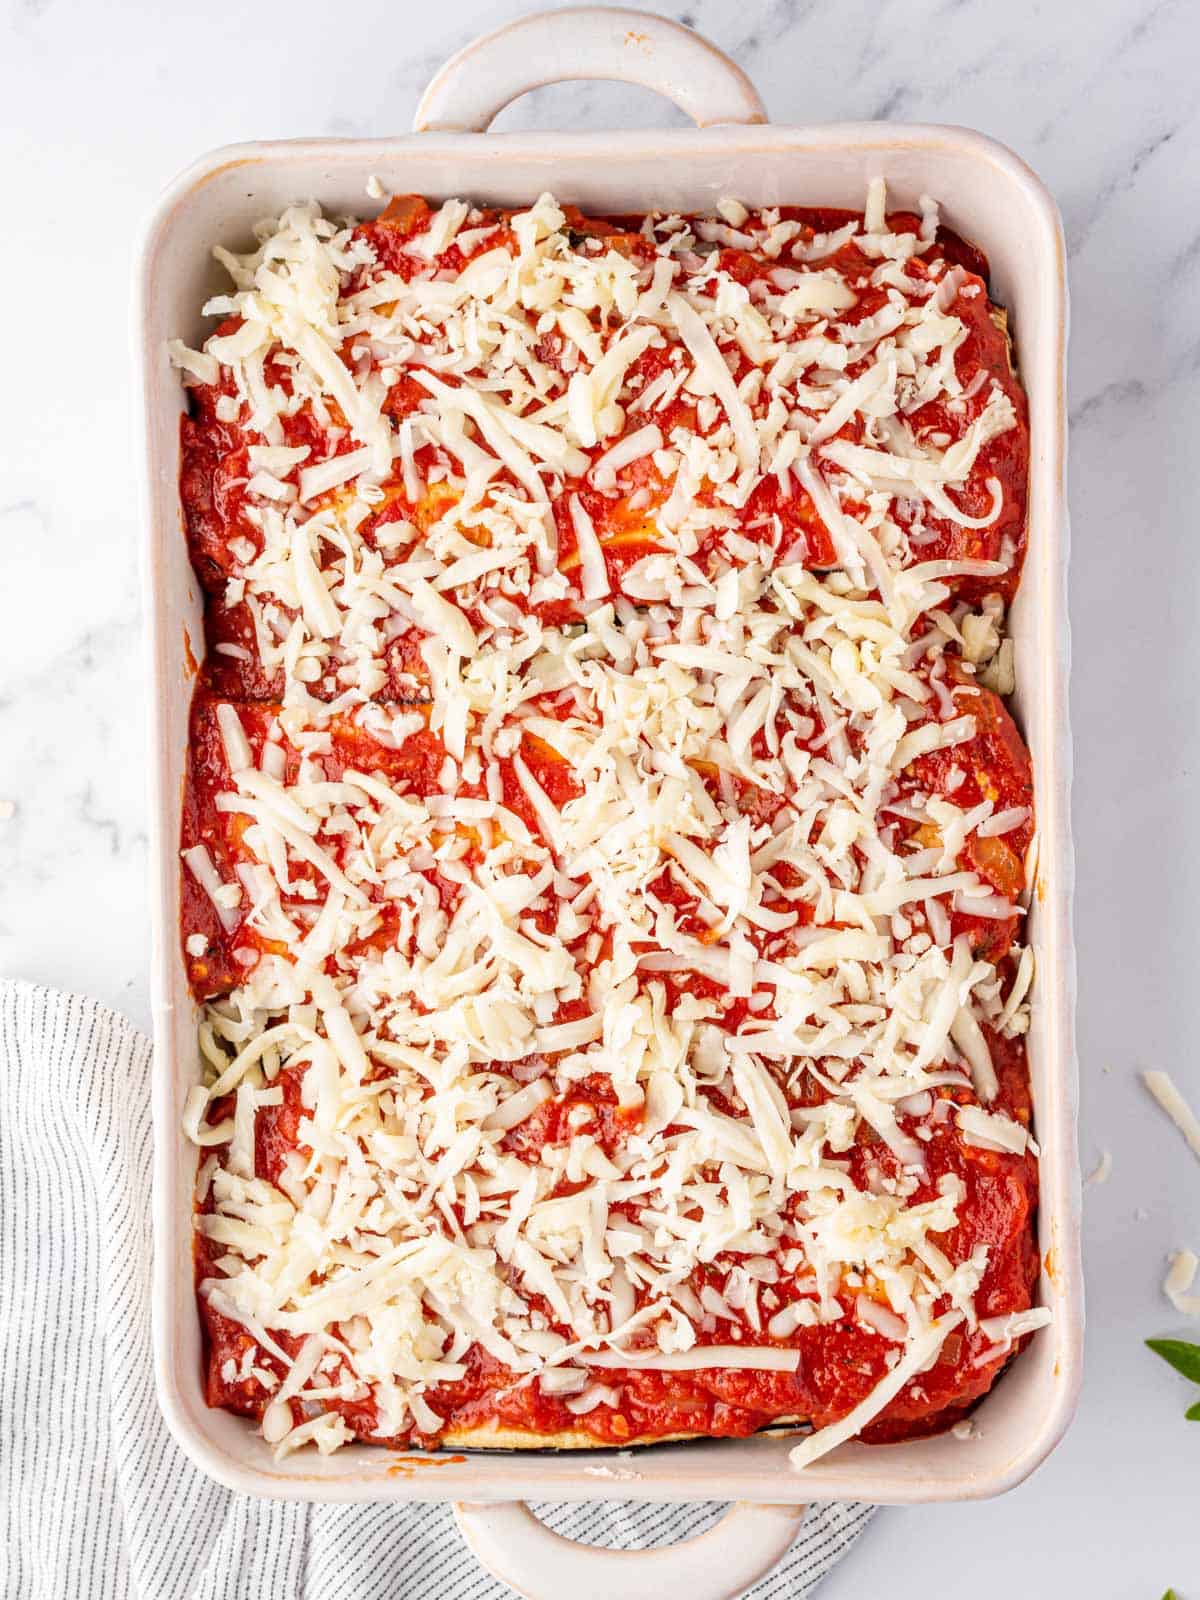 assembled eggplant parmesan in a baking dish before baking